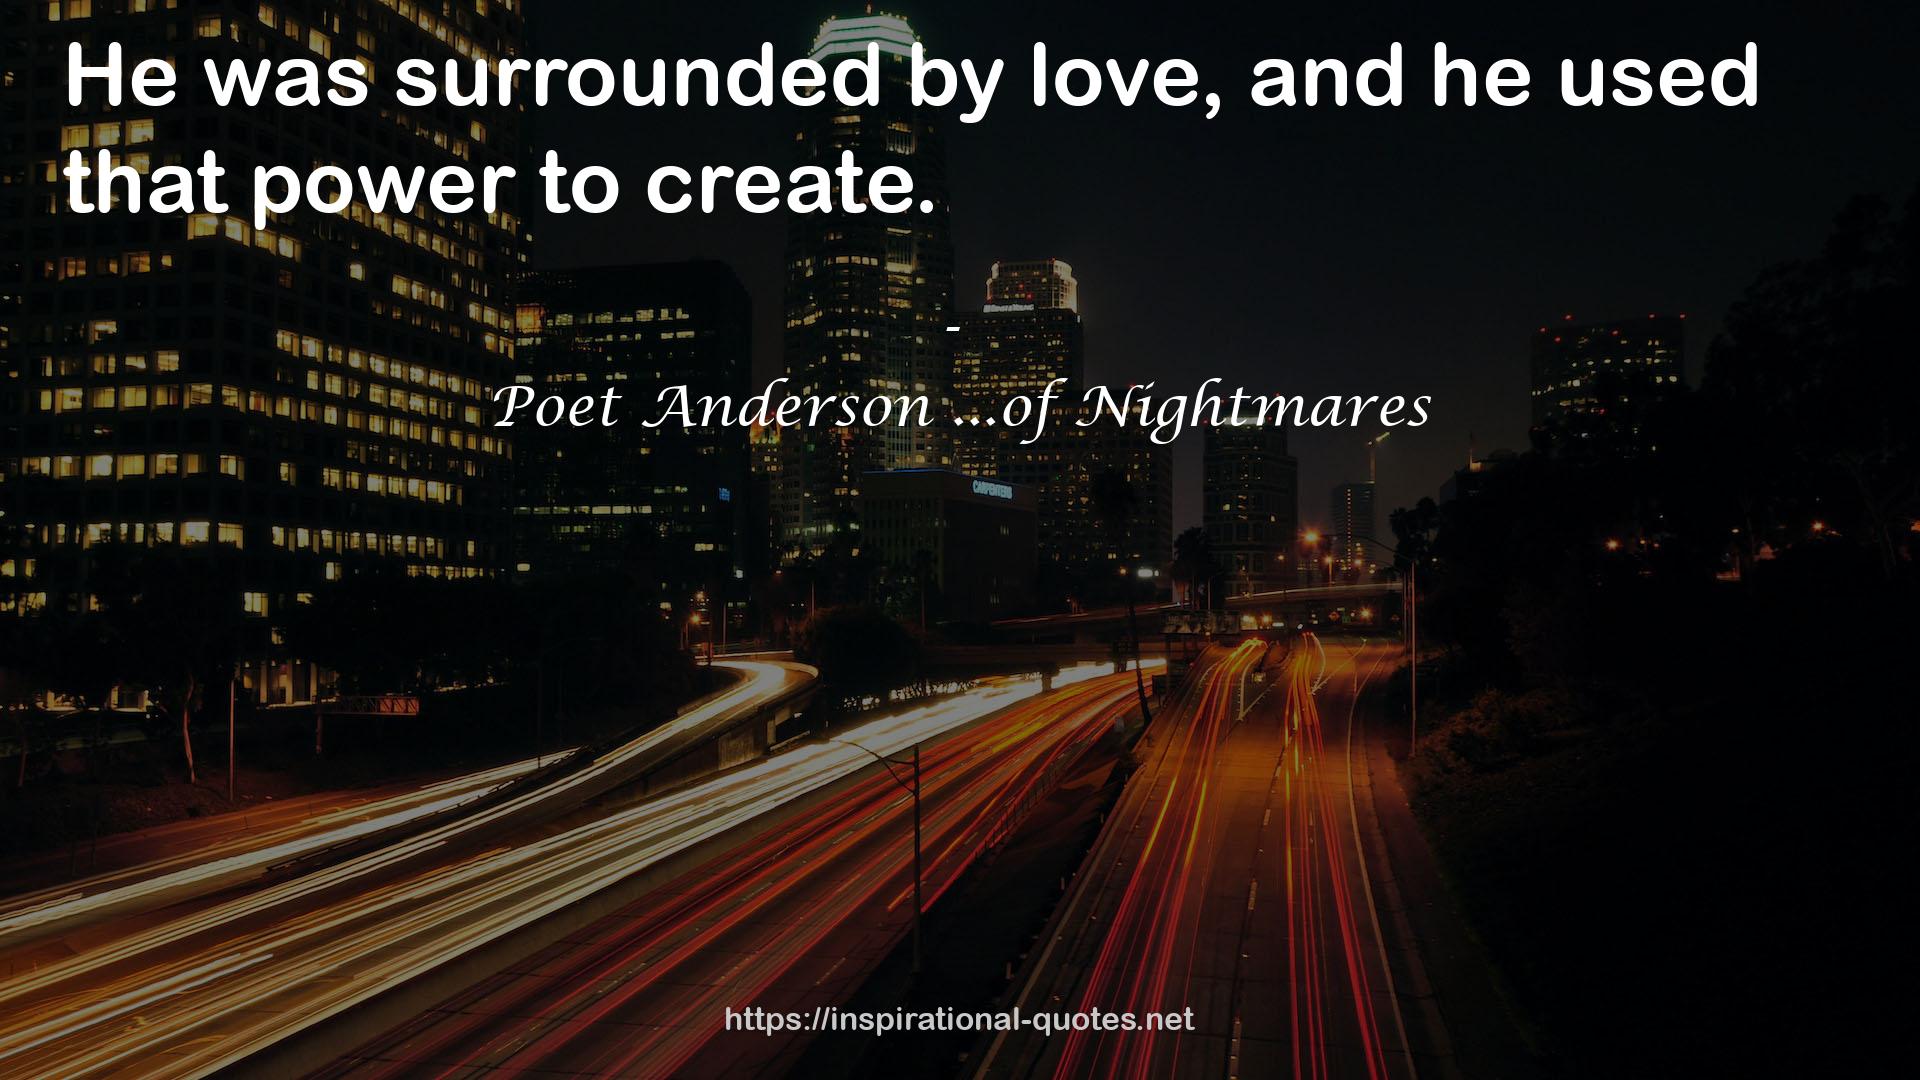 Poet Anderson ...of Nightmares QUOTES